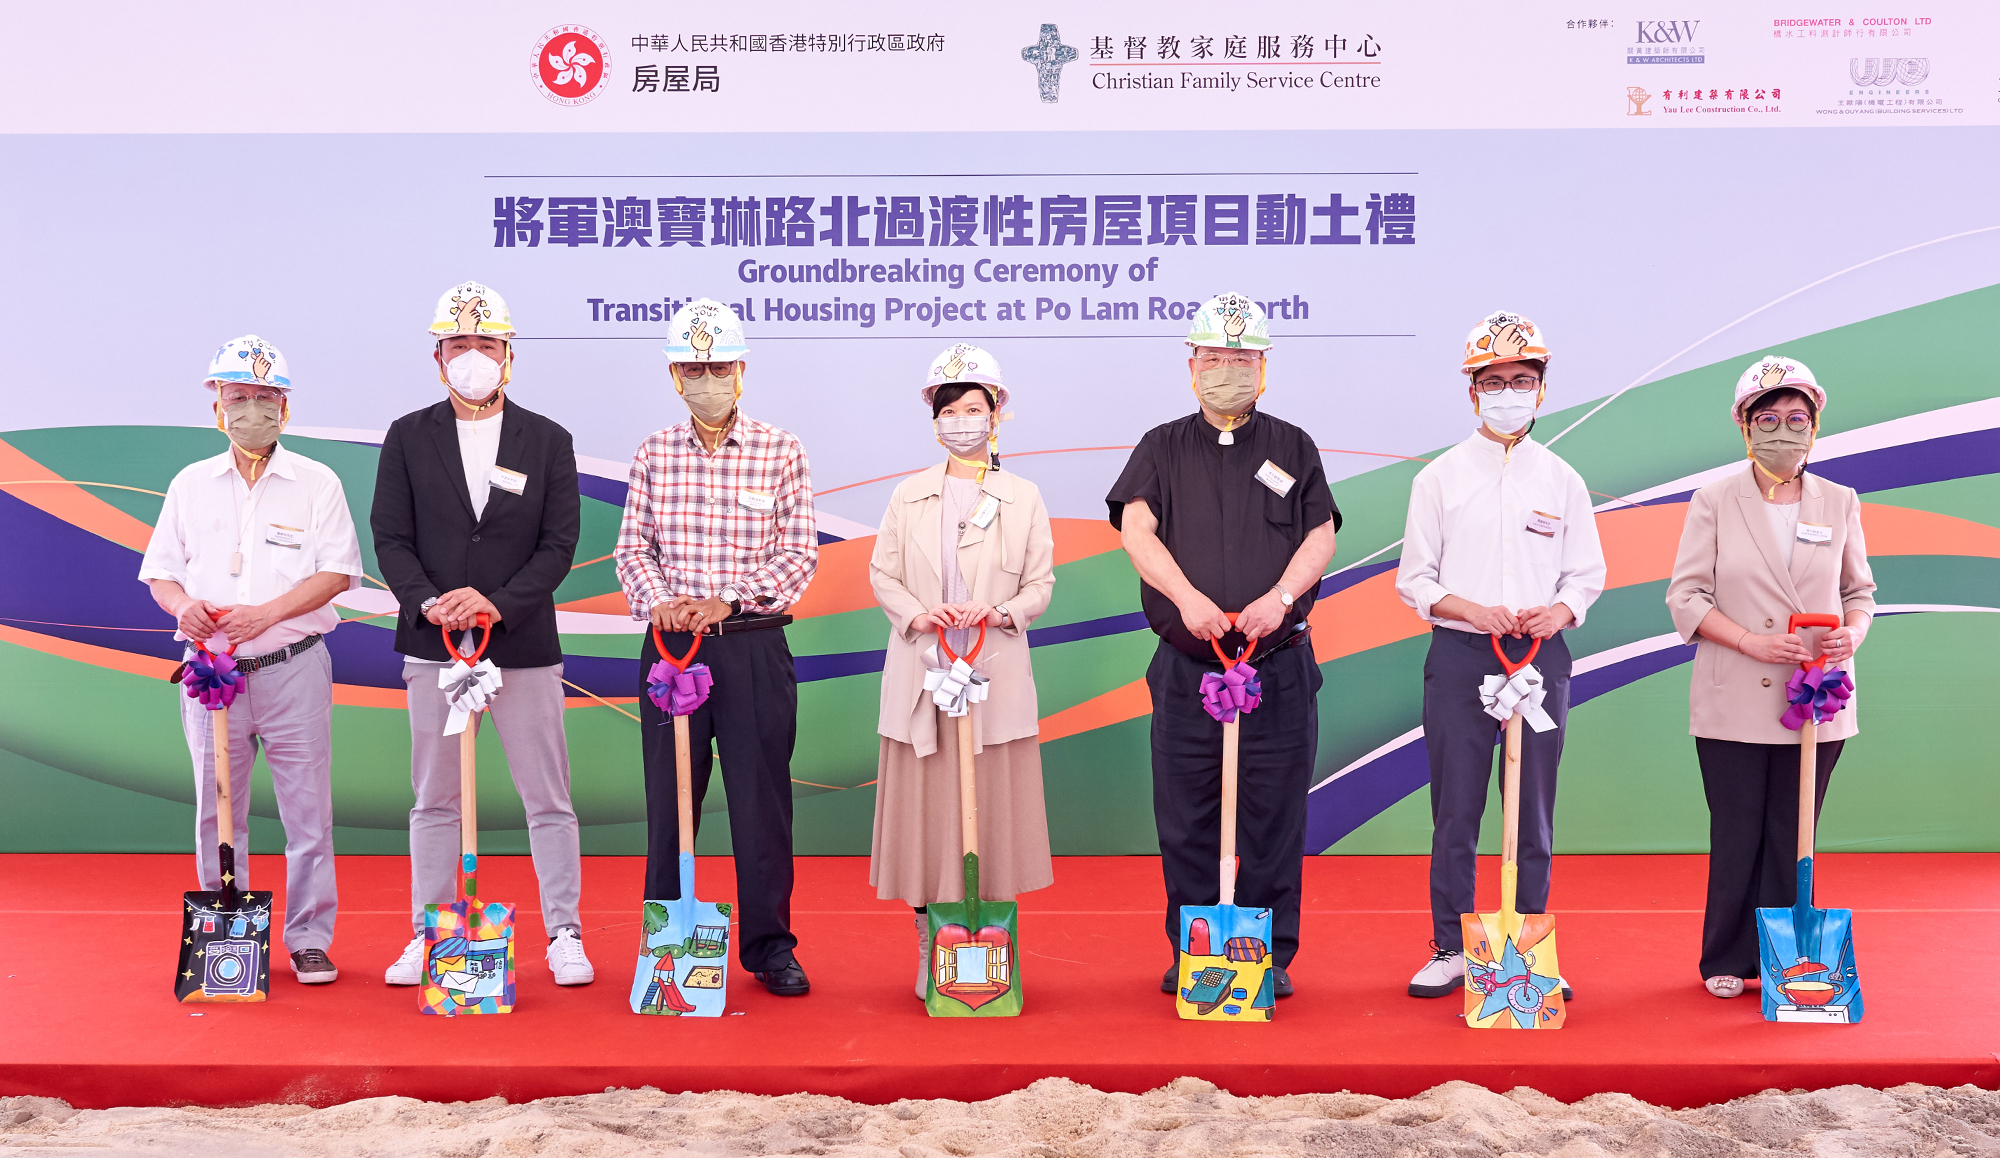 Transitional Housing Project at Po Lam Road North, Tseung Kwan O Ground Breaking Ceremony